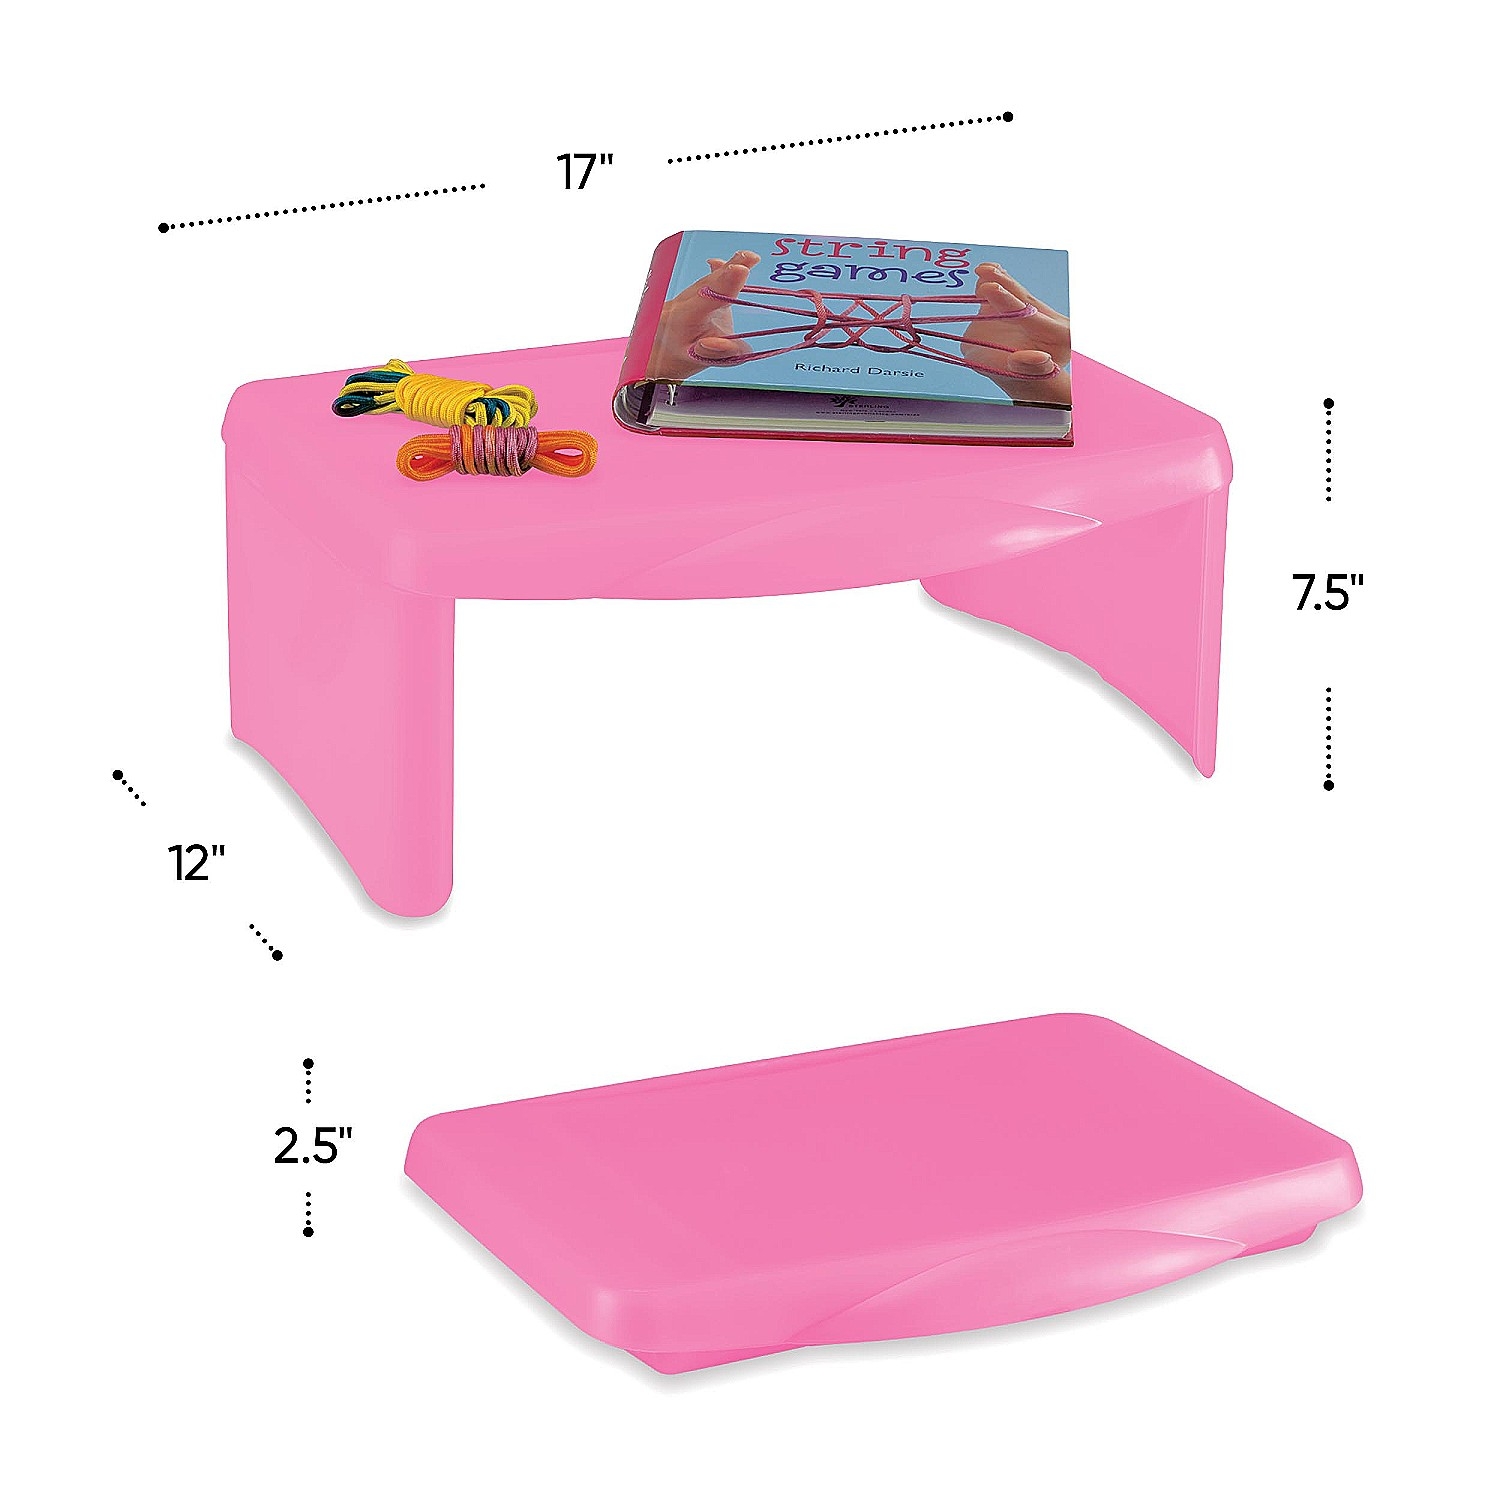 HearthSong Portable Folding Lap Desk With Storage Activity Tray - Pink - image 4 of 9